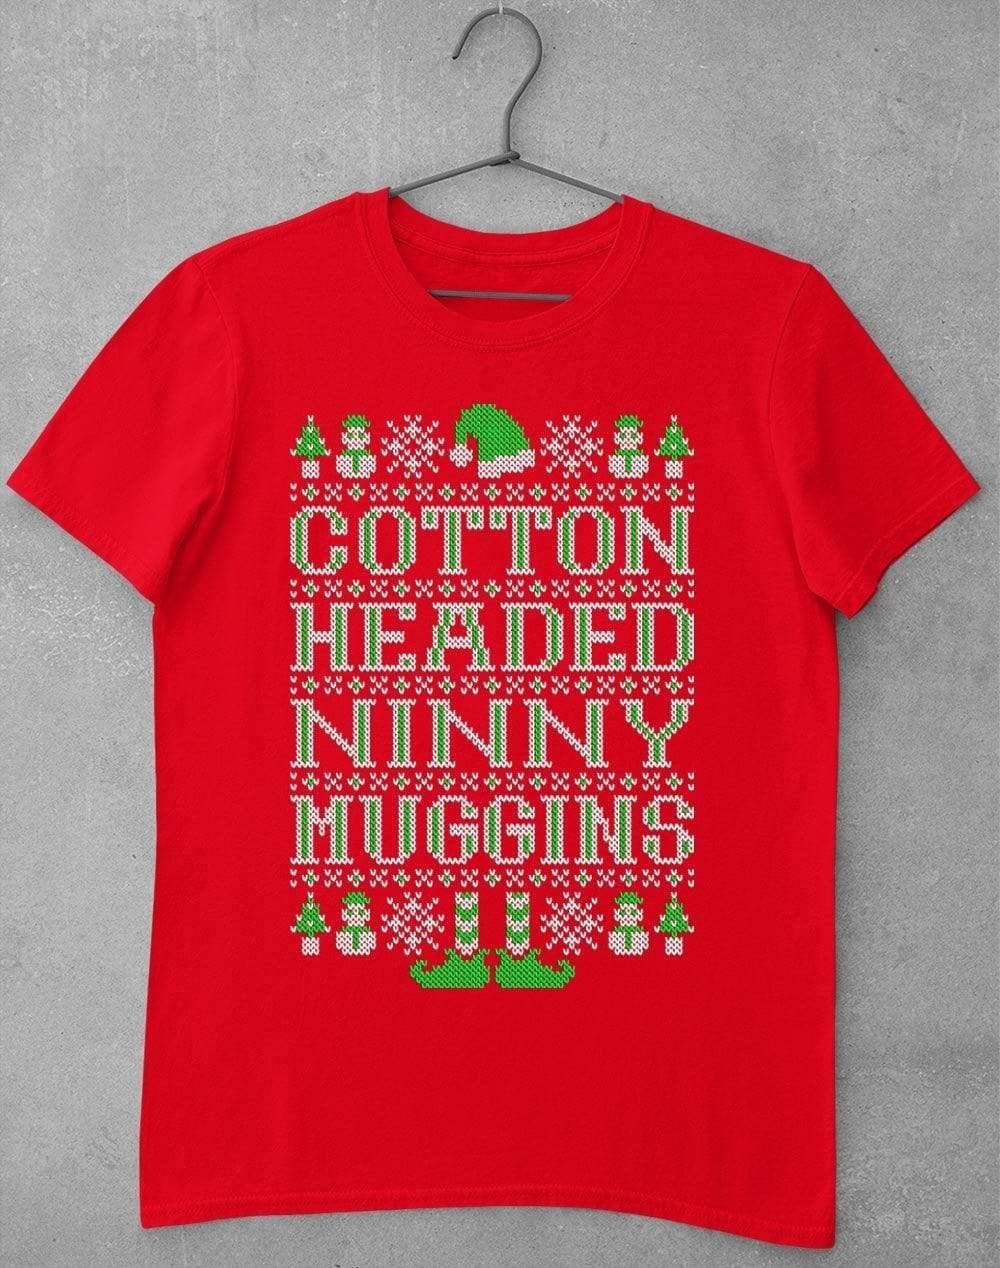 Cotton Headed Ninny Muggins Festive Knitted-Look T-Shirt S / Red  - Off World Tees